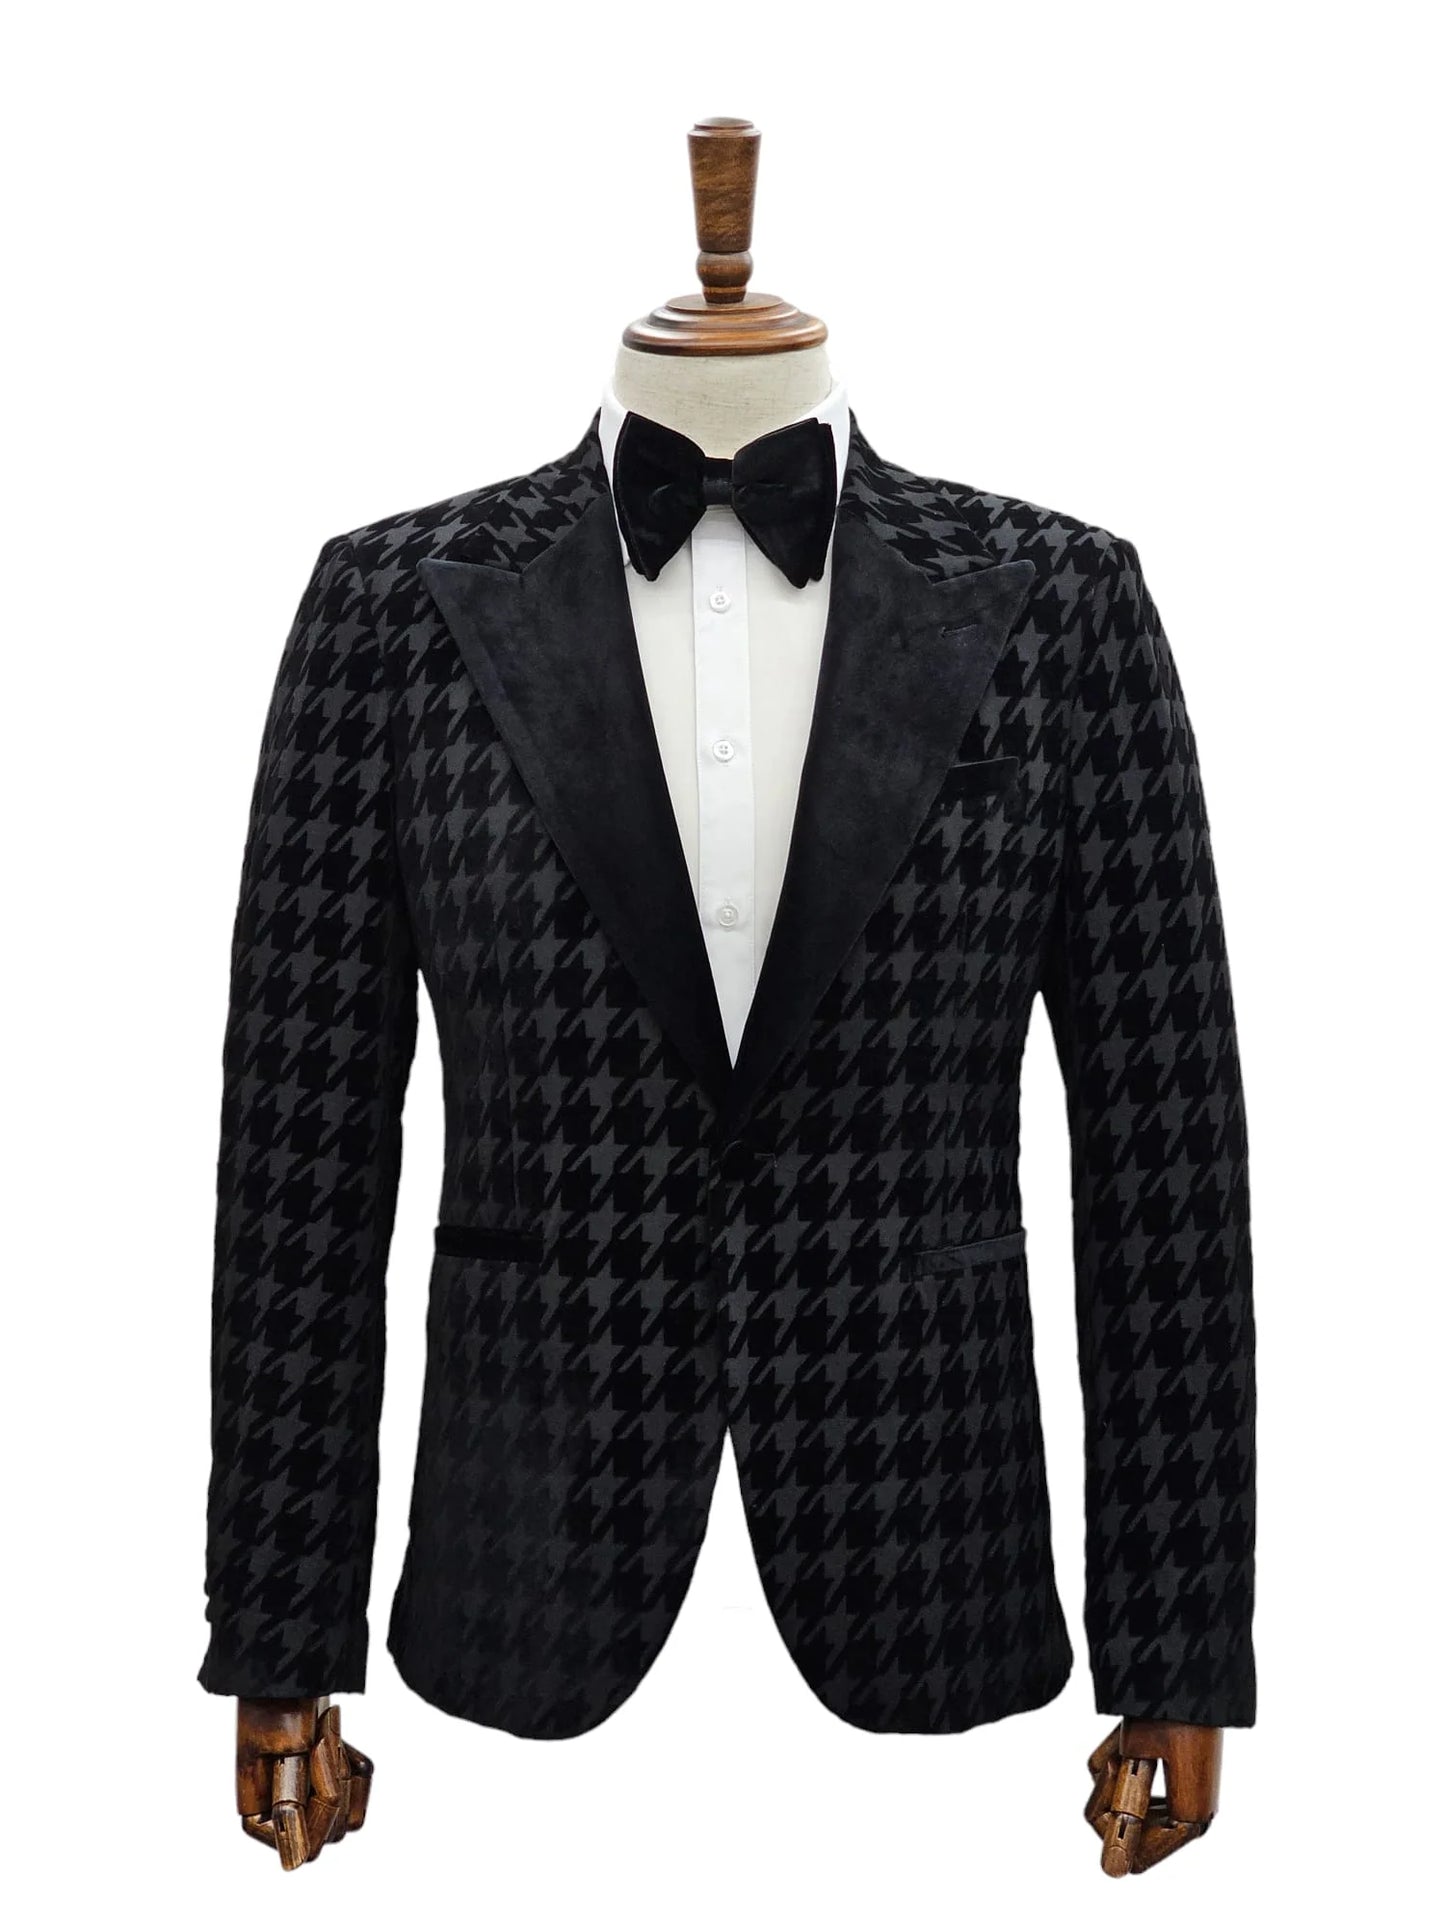 KCT Menswear black houndstooth tuxedo jacket, the epitome of timeless formal style